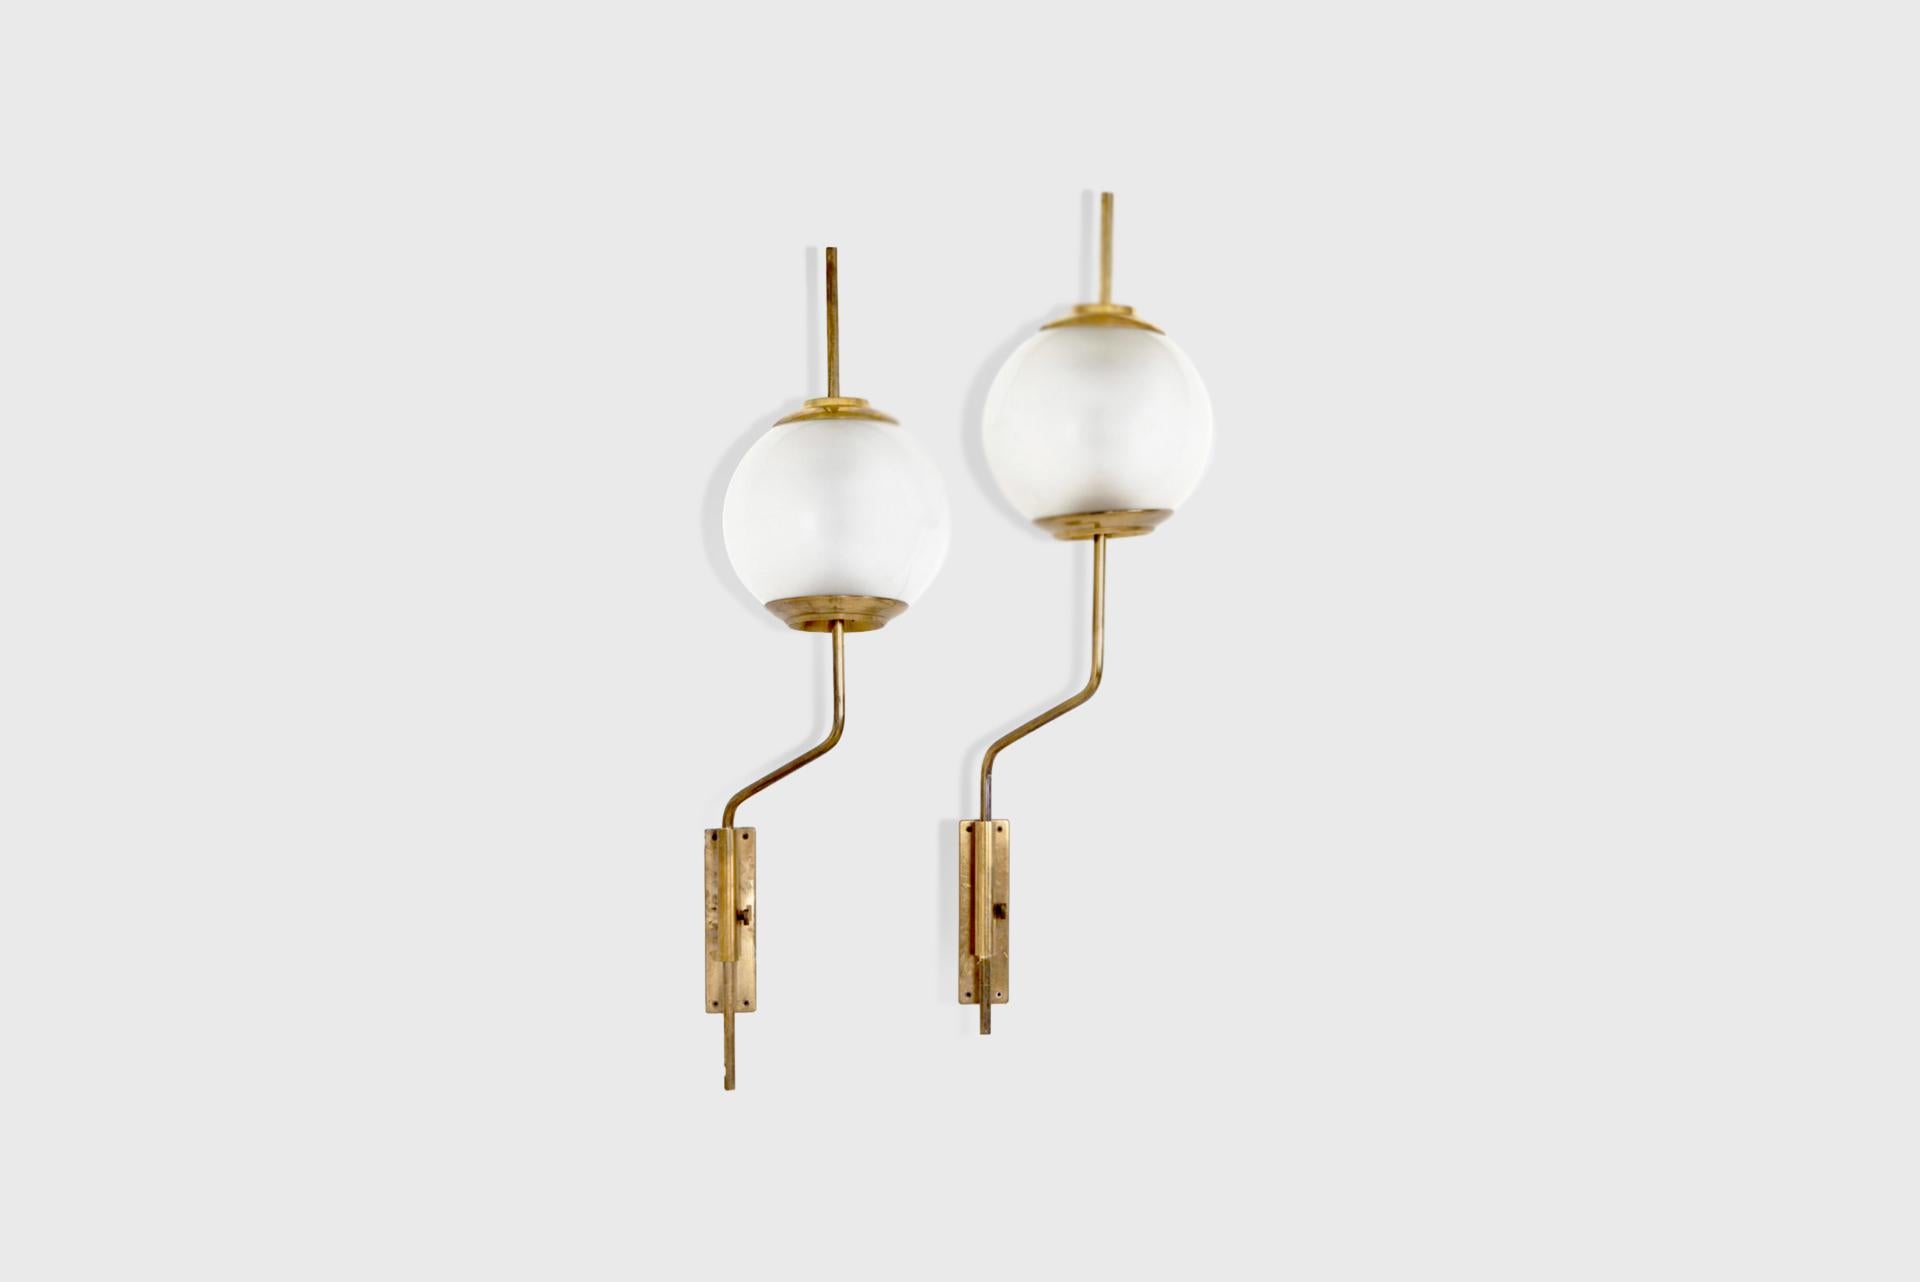 Pair of wall lamps model “LP 11”
Manufactured by Azucena Italy, 1959 Brass, frosted glass
Measurements
45 cm diameter x 115 cm height 17,71 in diaemter x 45,27 in height
Provenance
Private collection, Milano
Literature
Domus 381 (agosto 1961) p. 35;